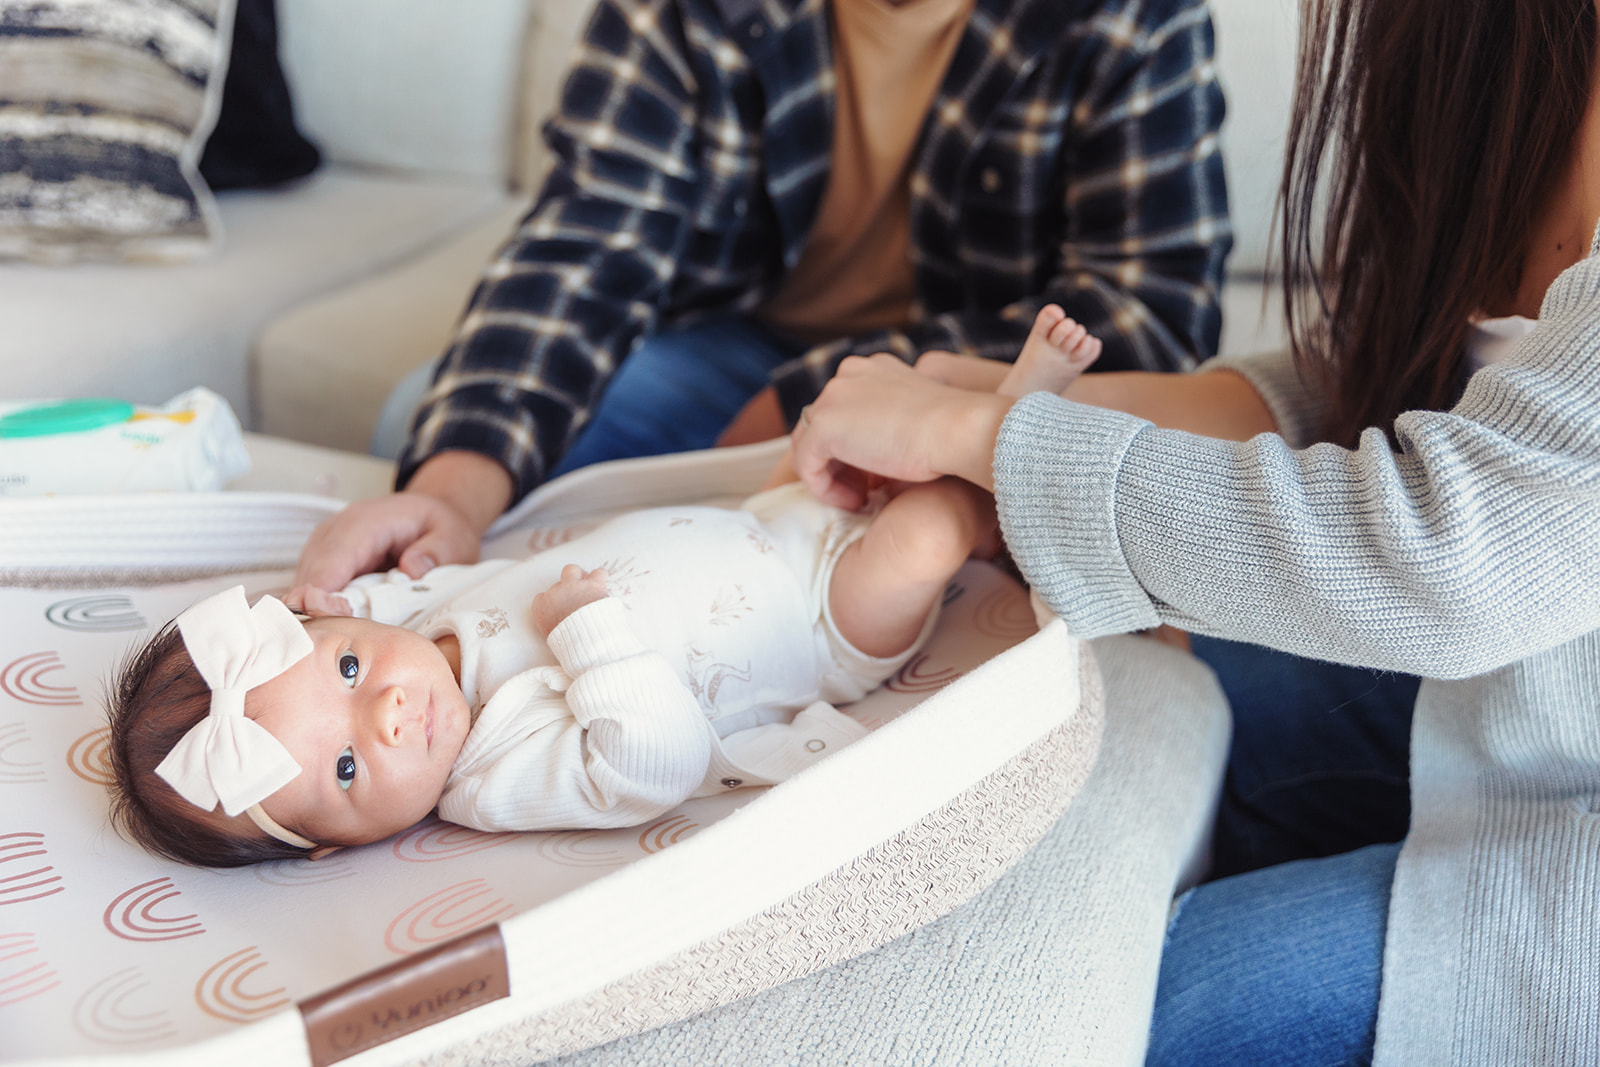 A beautiful In-Home Lifestyle Newborn Session held in Harrod, Ohio.